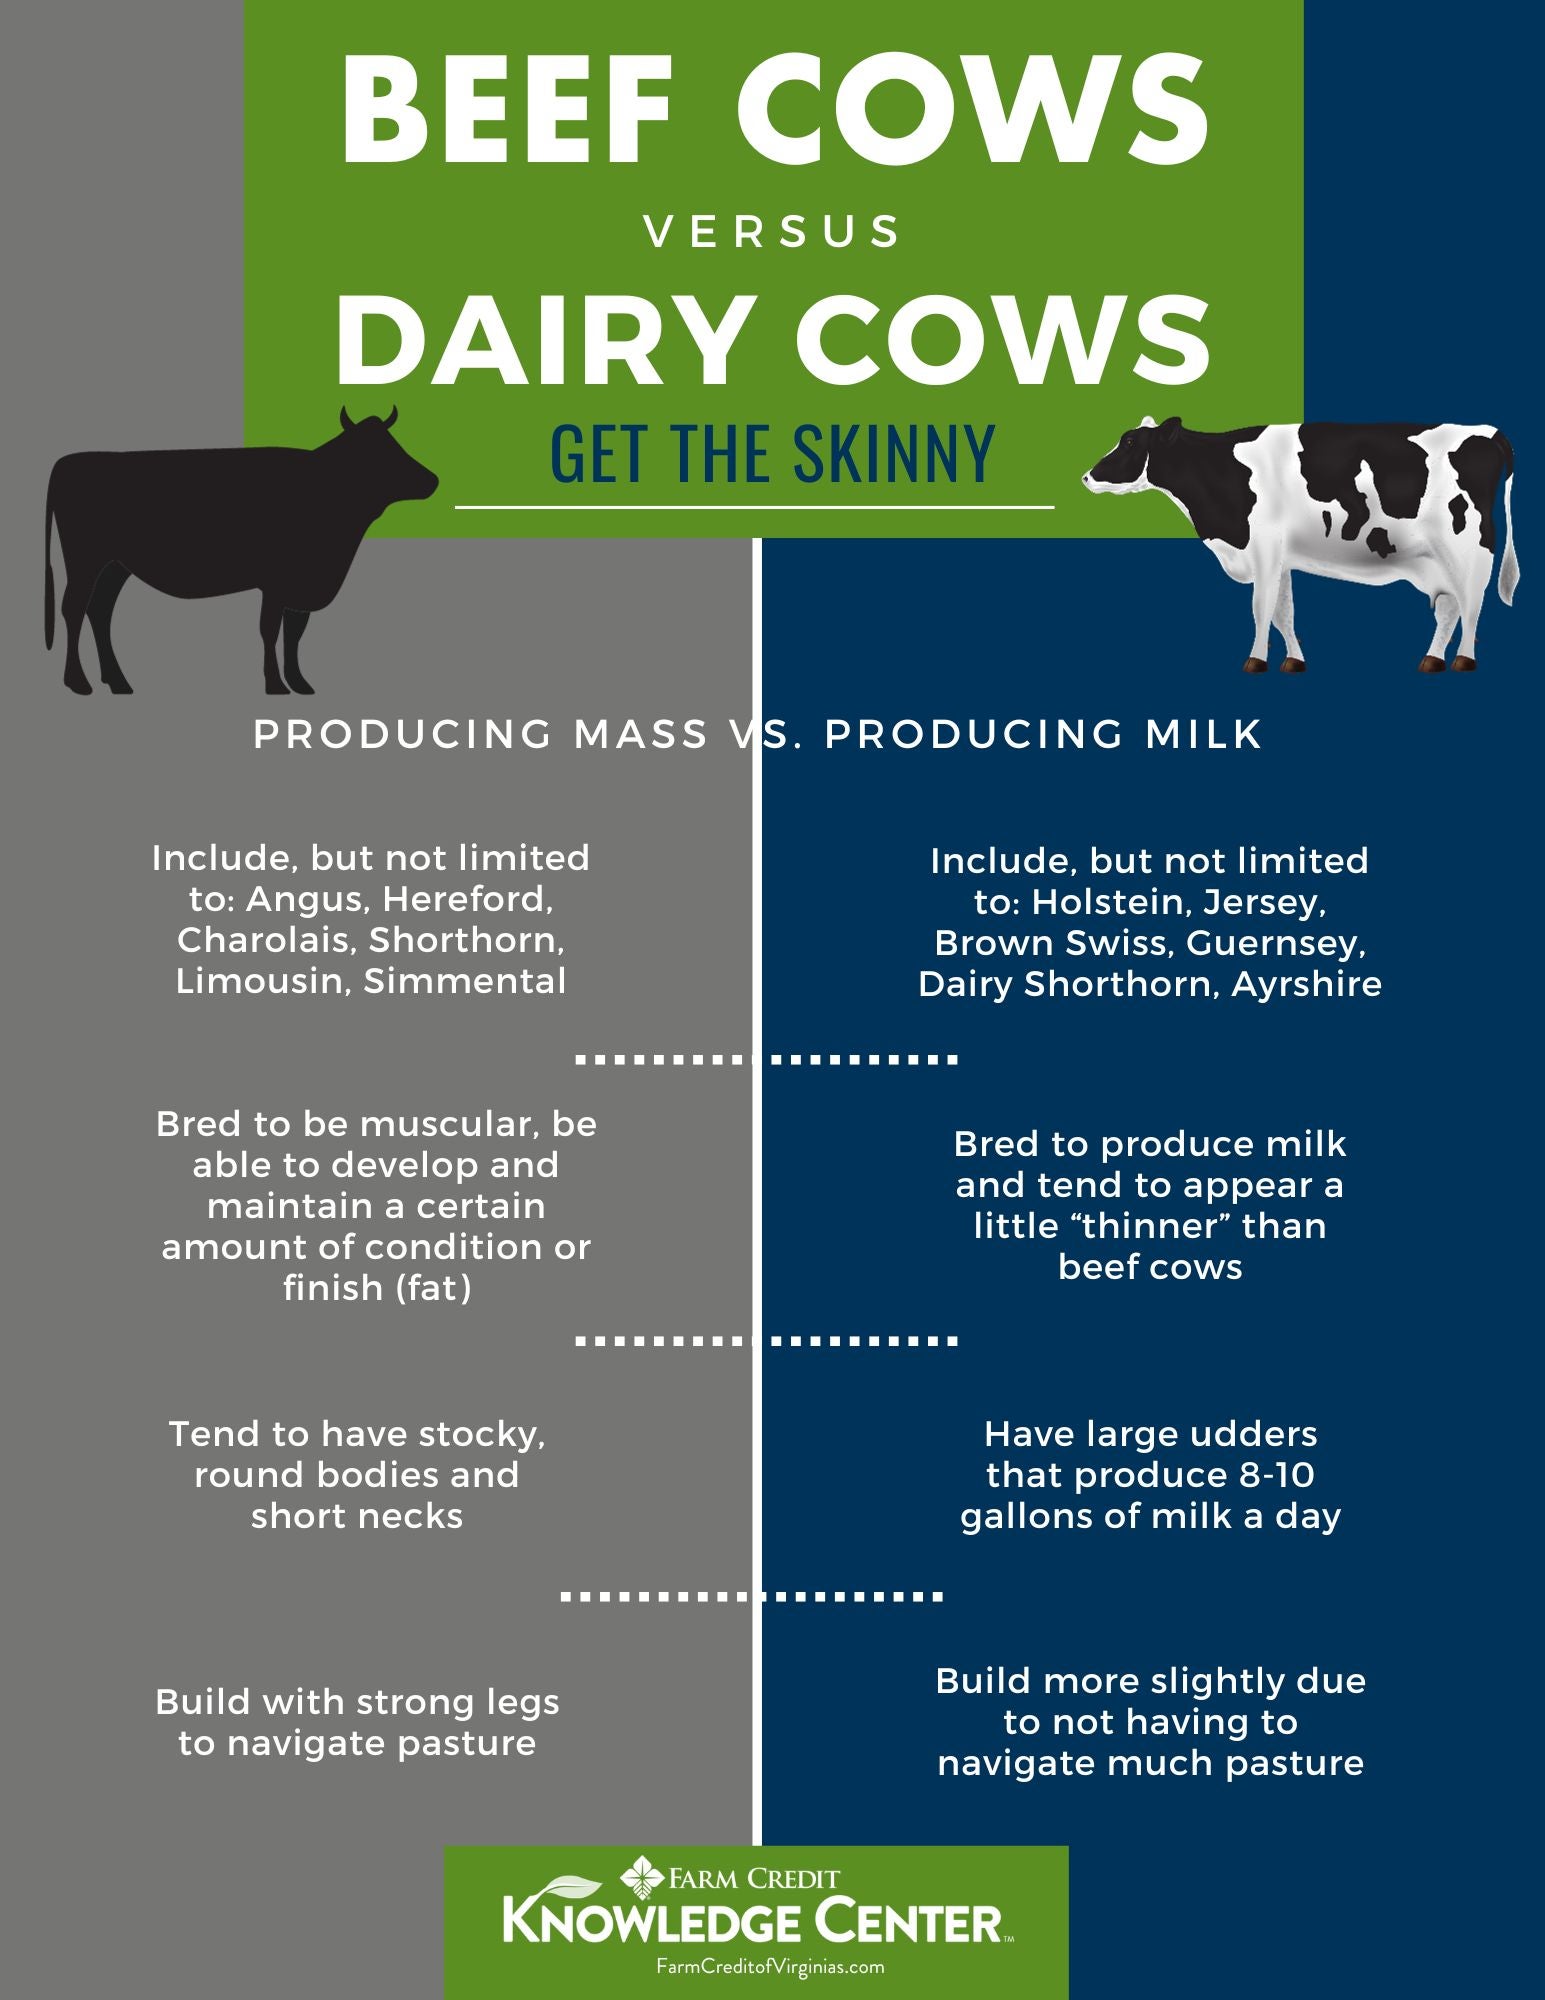 Beef Cow vs. Dairy Cow Infographic showing the difference between the two cattle types.